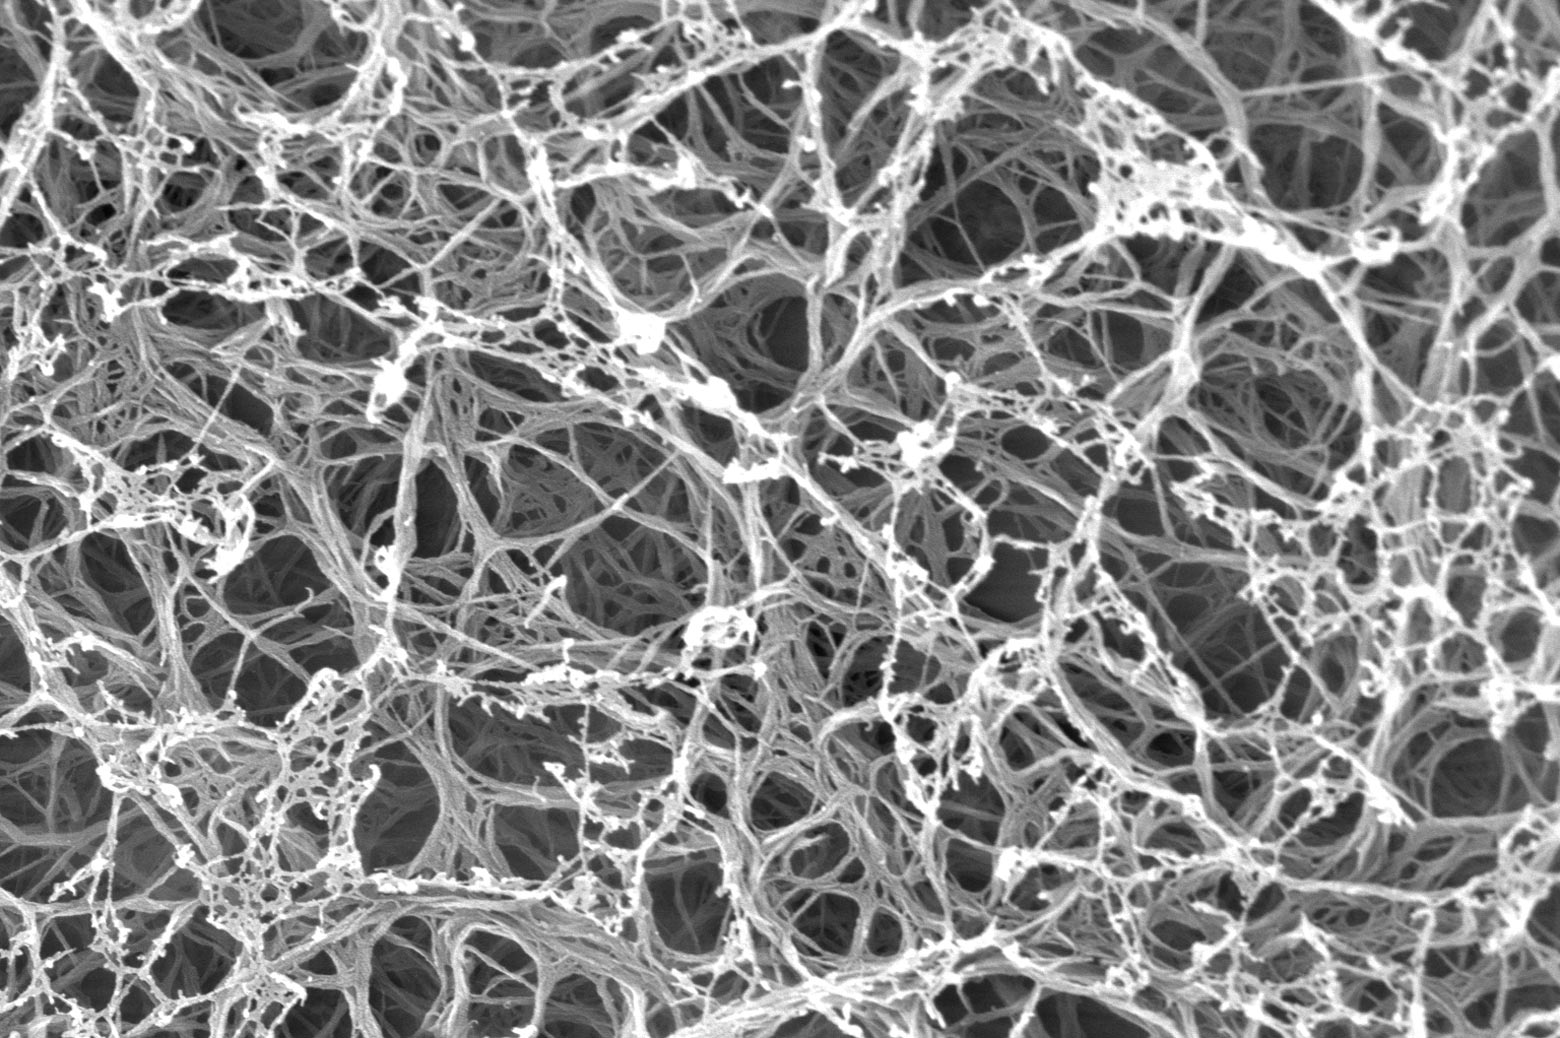 An electron microscope image of the synthetic cartilage matrix